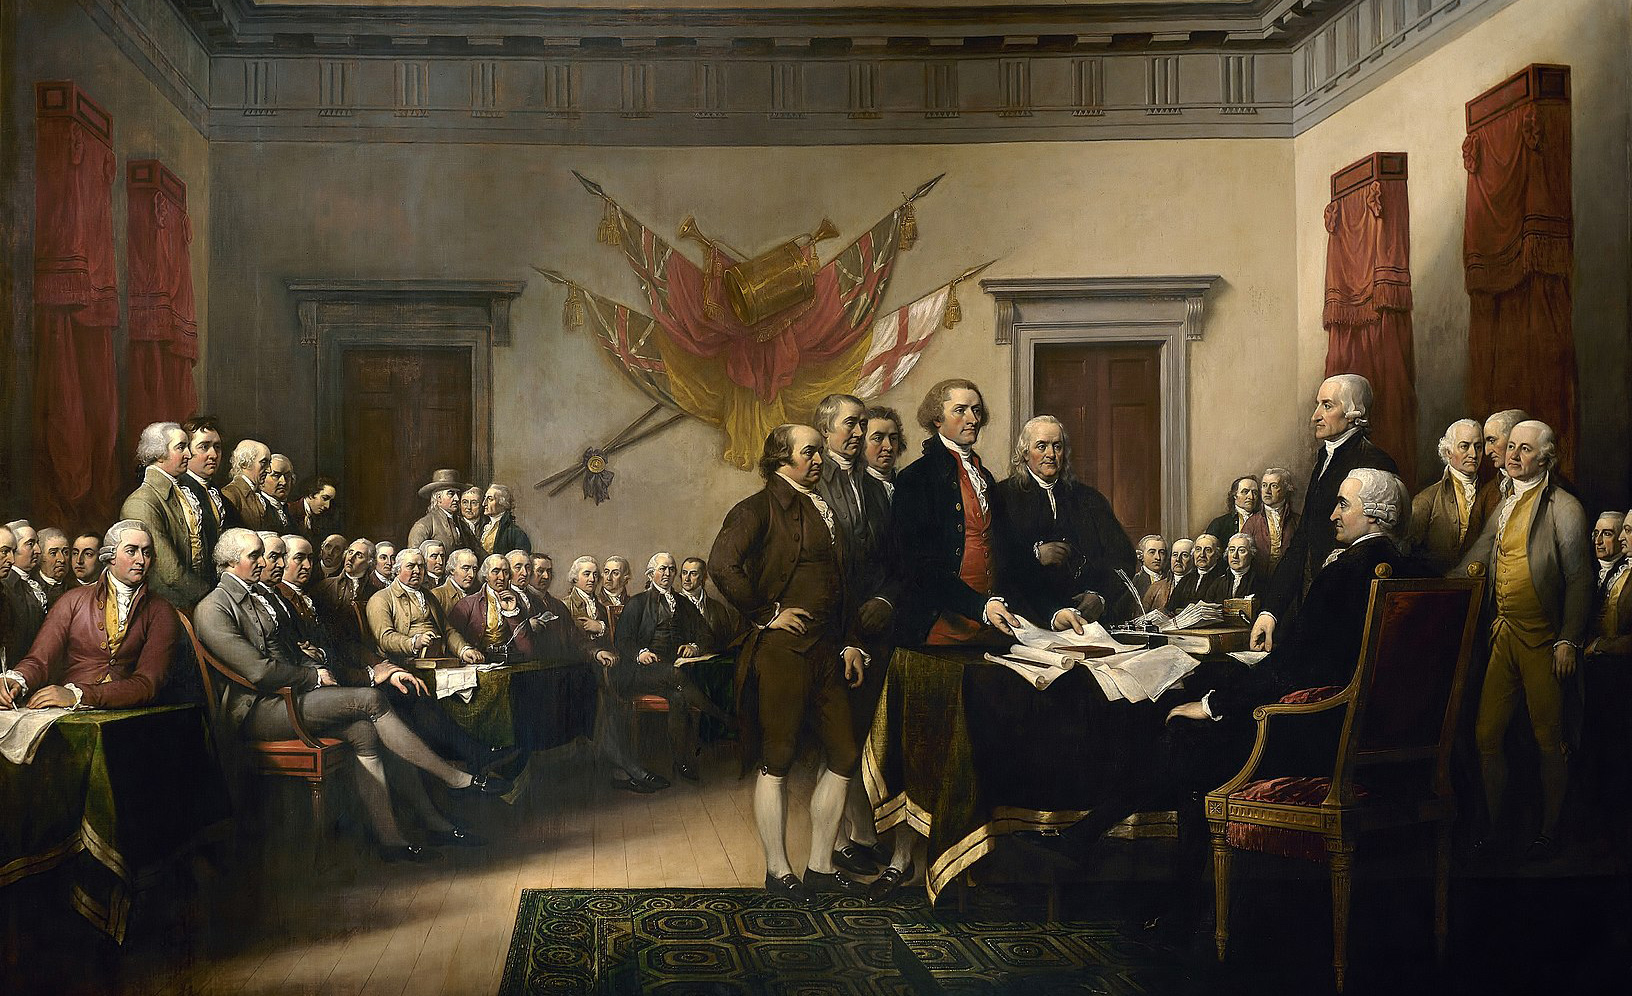 From the painting Declaration of Independence by John Trumbull, 1818. Wikipedia.
